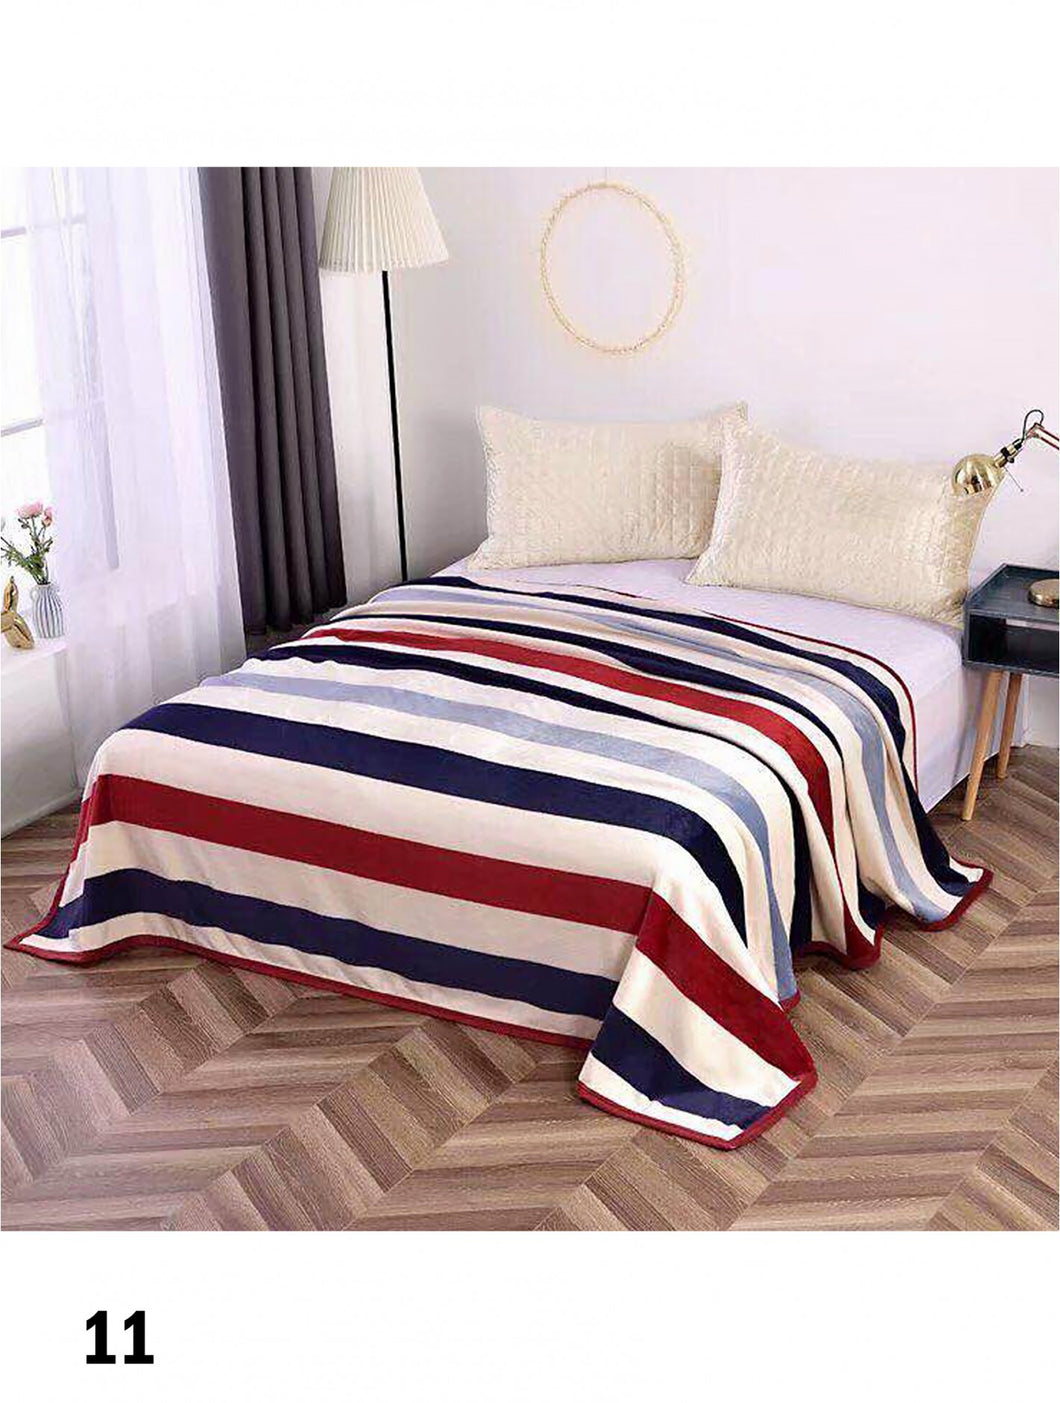 Embroidered Microfiber Soft Printed Flannel Blanket (with gift packaging) - Striped